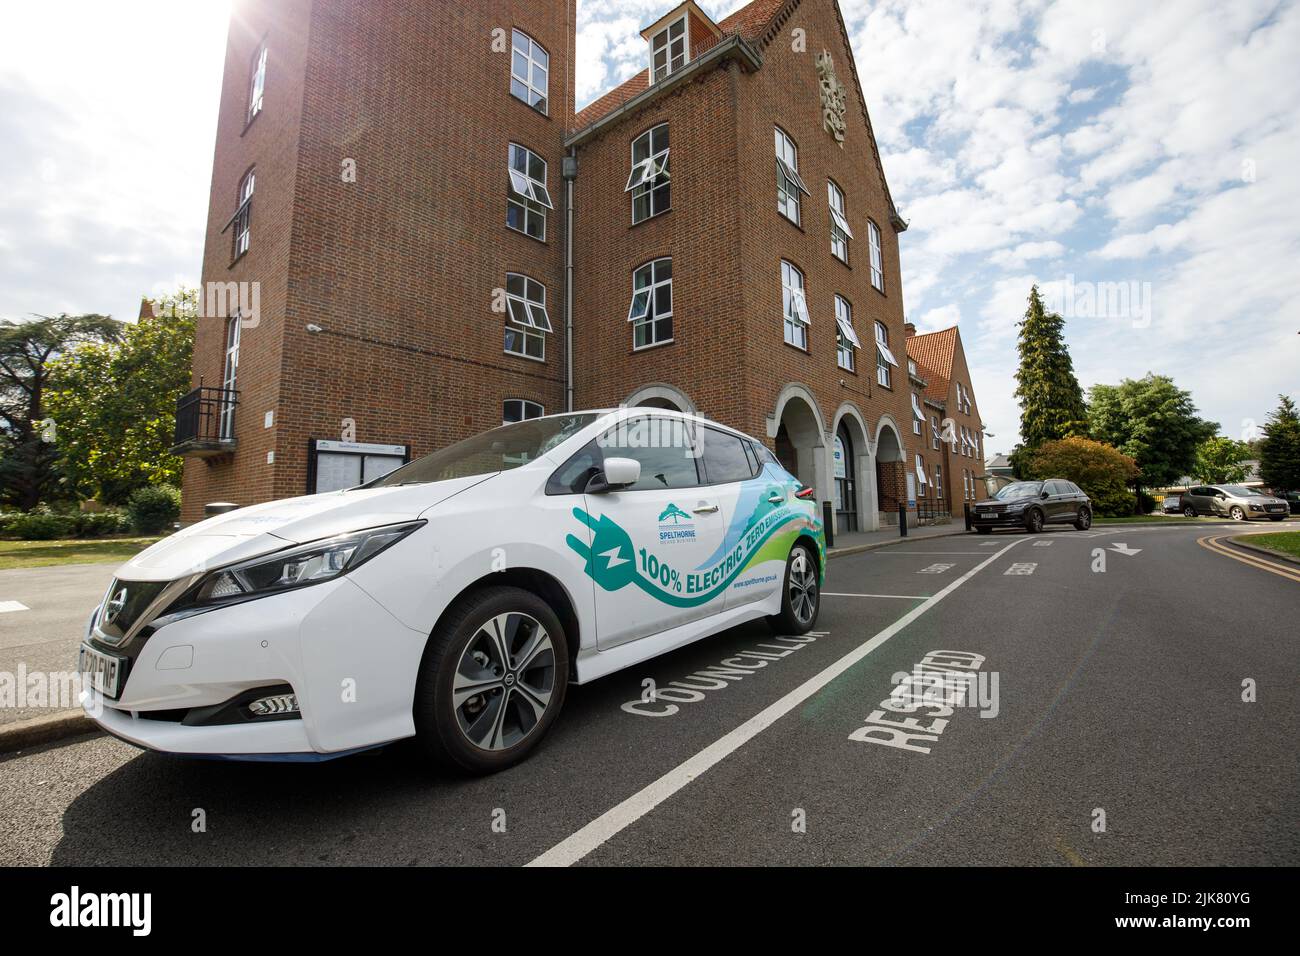 An electric car with promotional advertising graphics, used by a councillor from the Borough of Spelthorne, outside the council offices in Staines Stock Photo